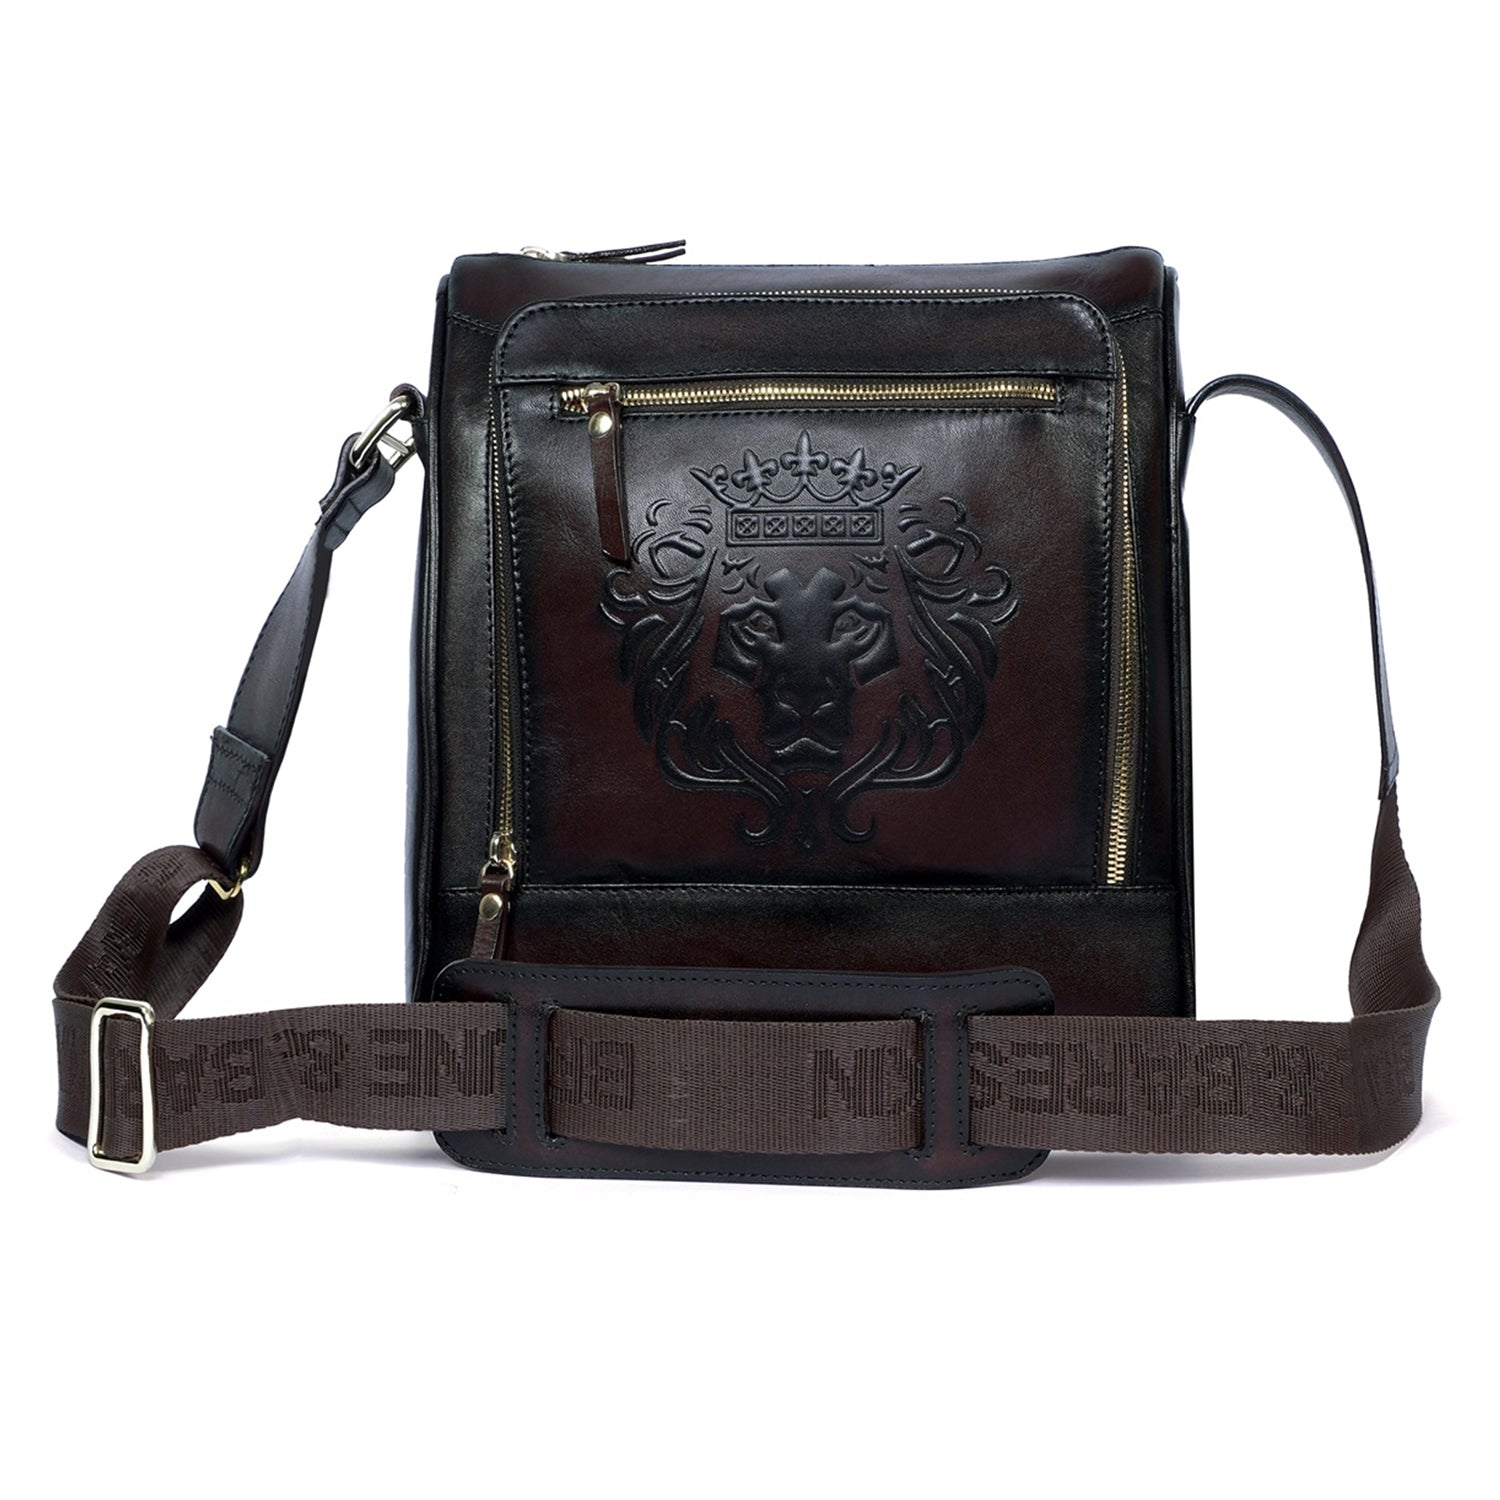 Fanny Pack Bag In Dark Brown Leather with Embossed Lion